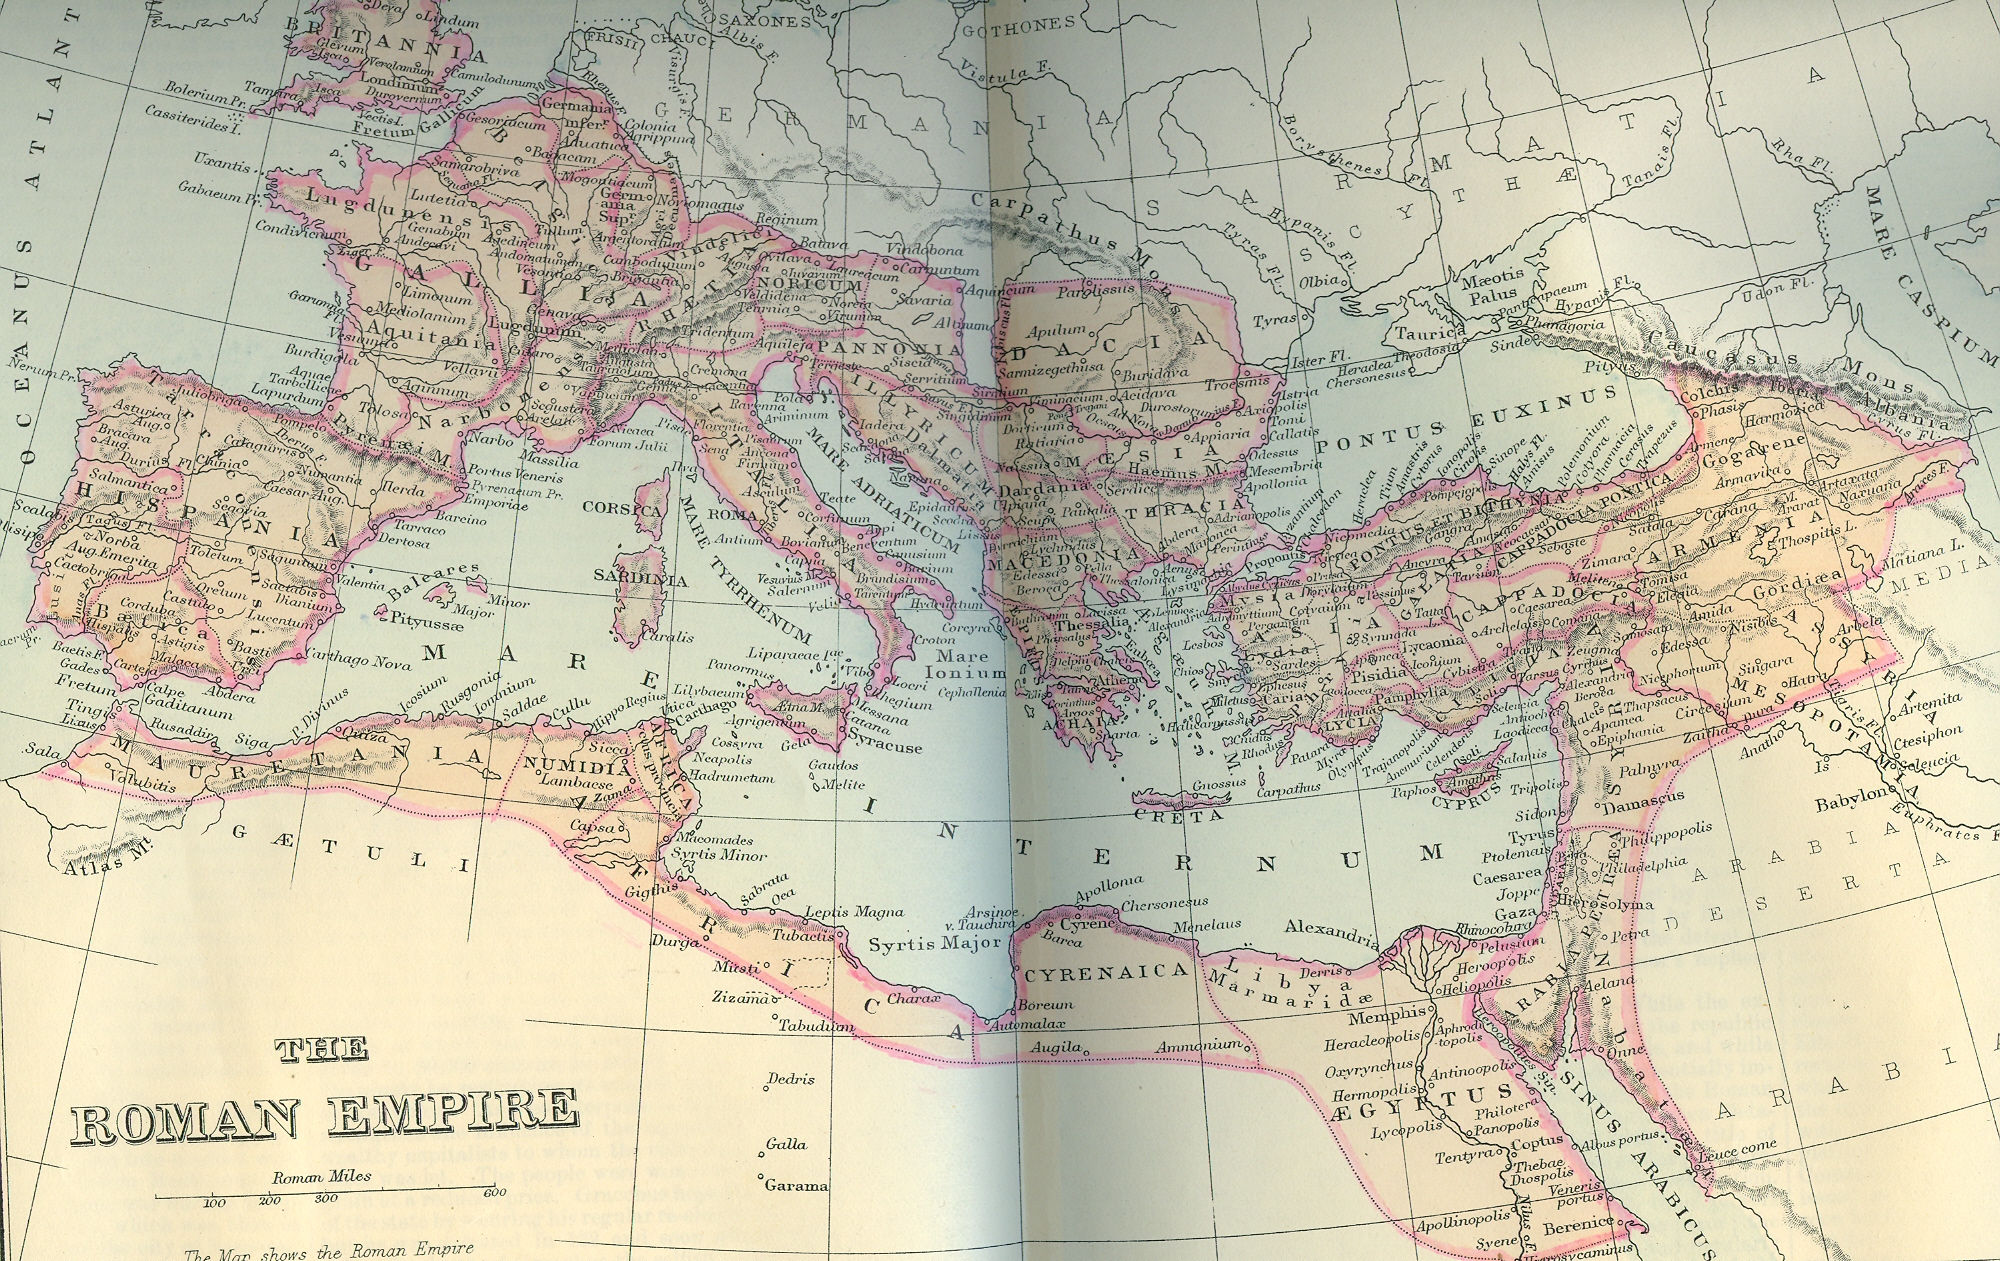 map of the Roman Empire at its largest extent